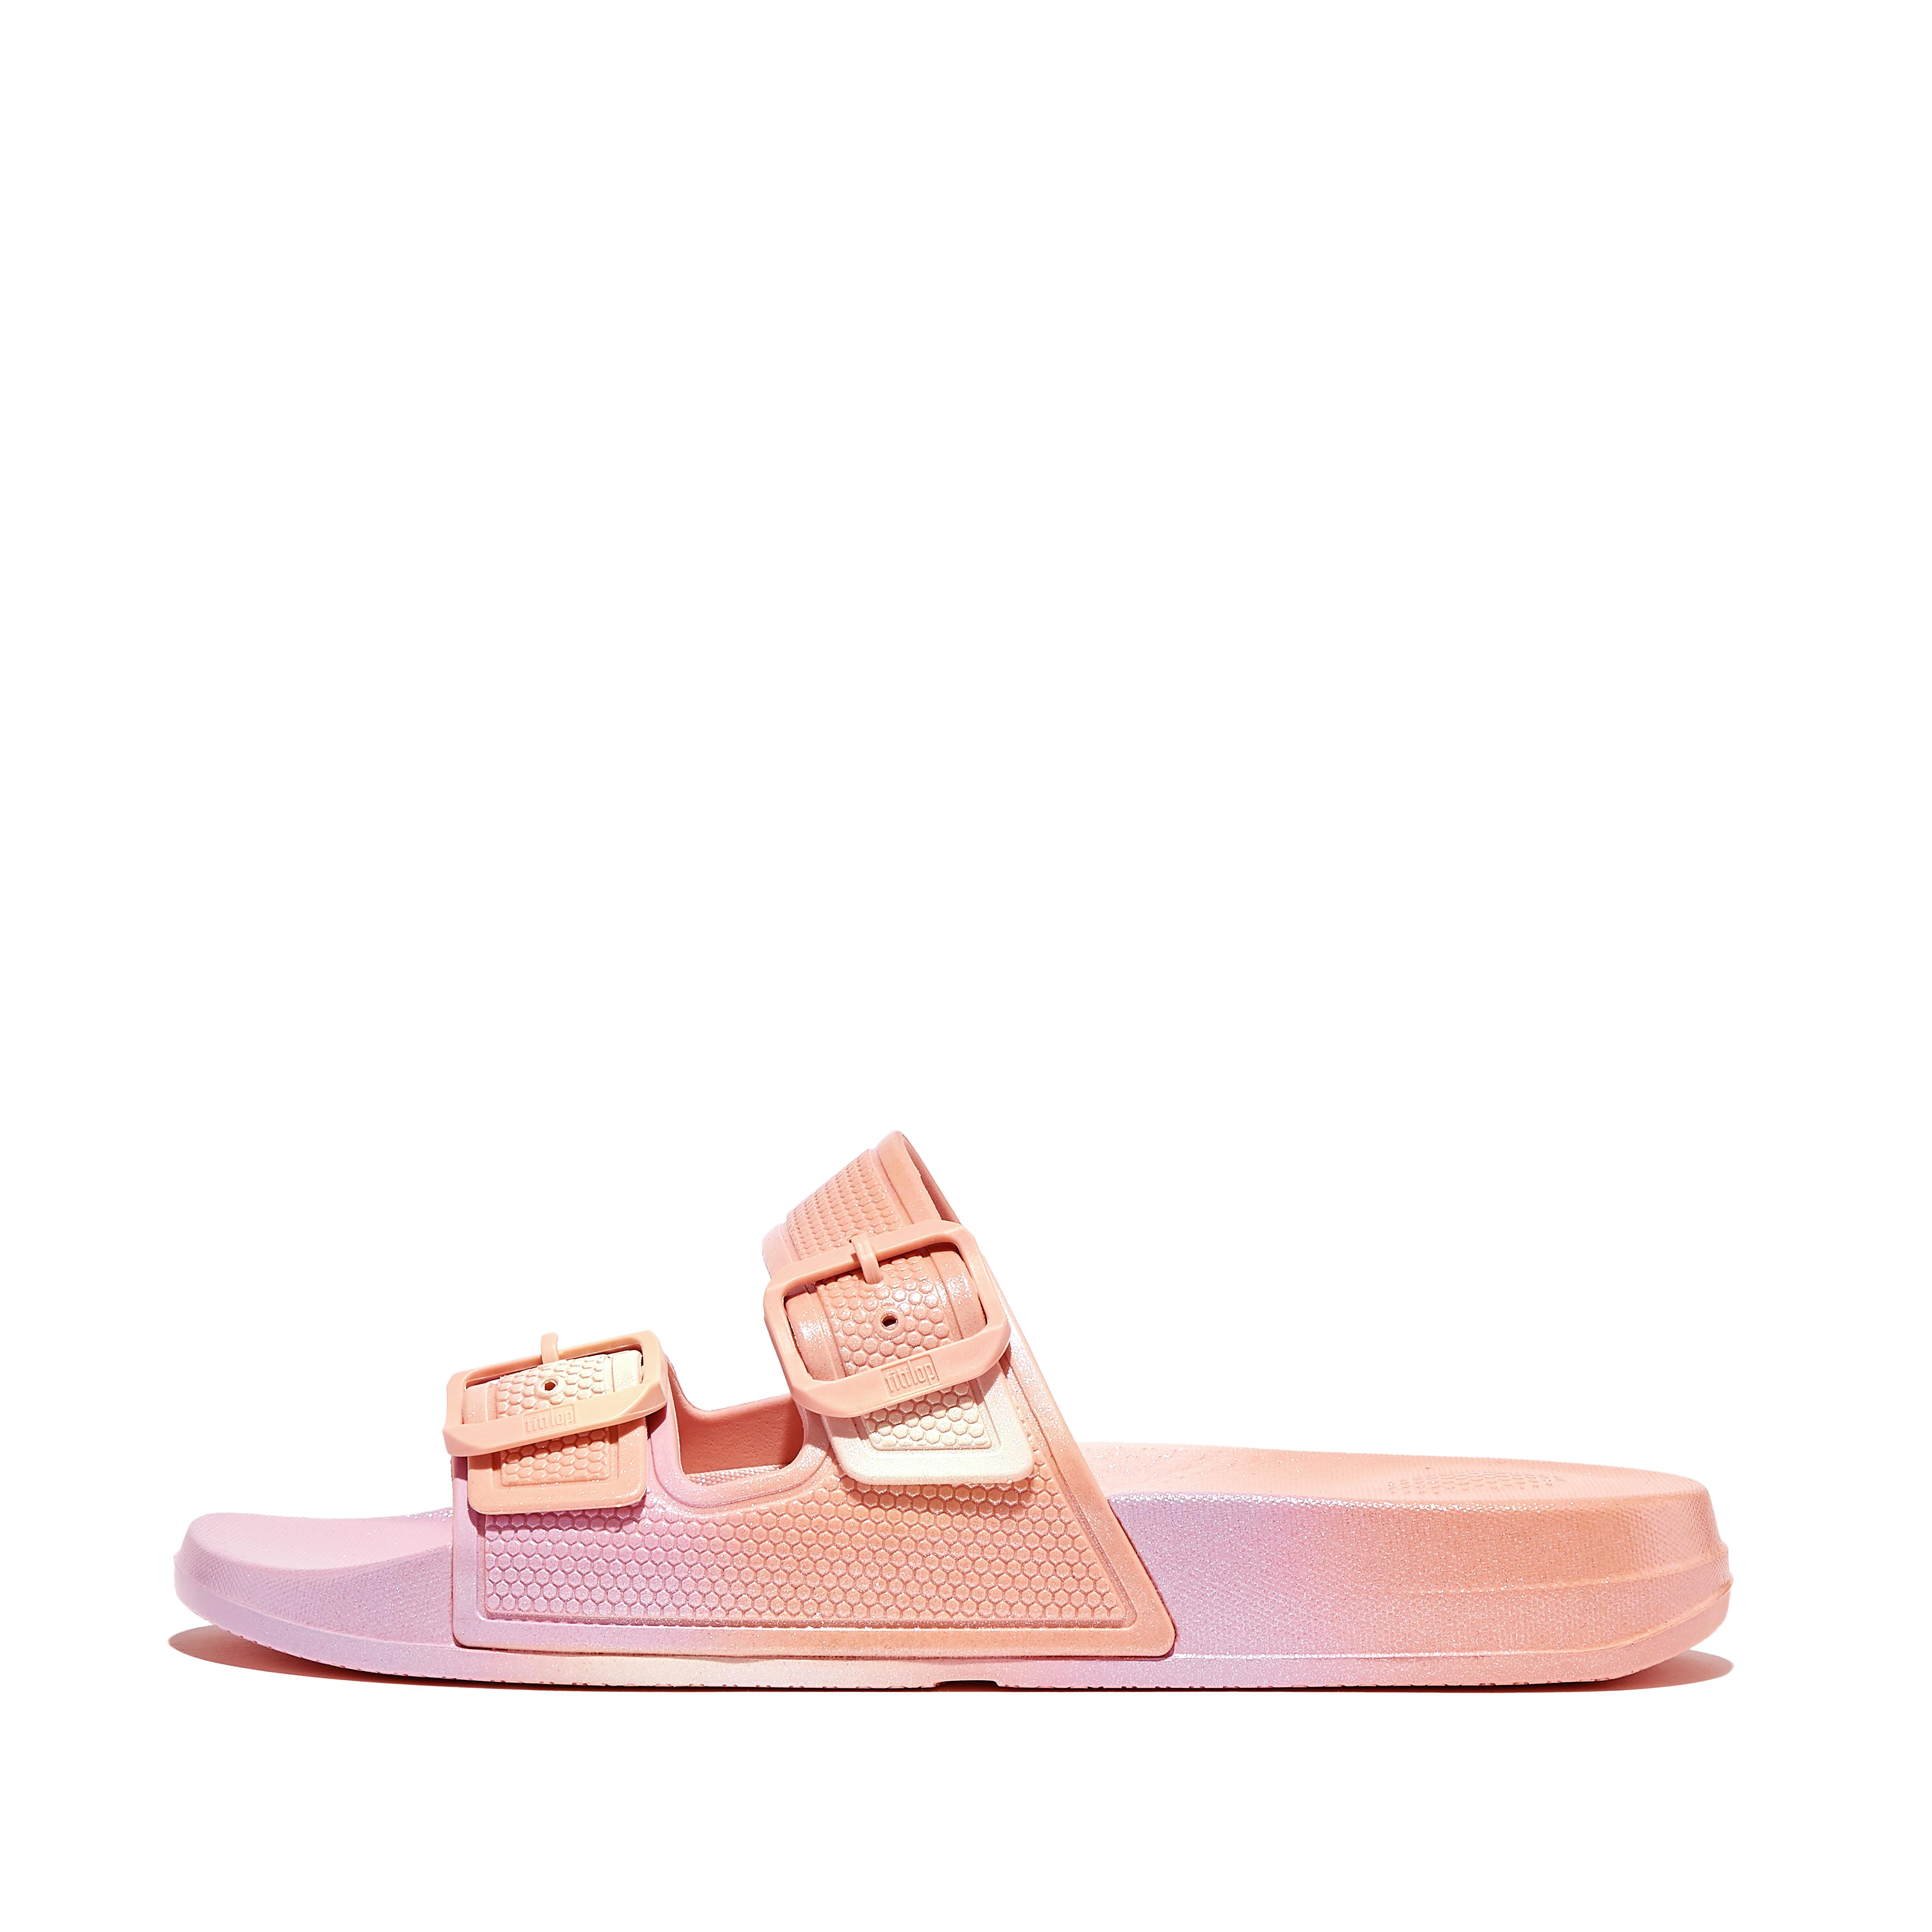 Fitflop Iridescent Two-Bar Buckle Sliders,urban-white-iridescent